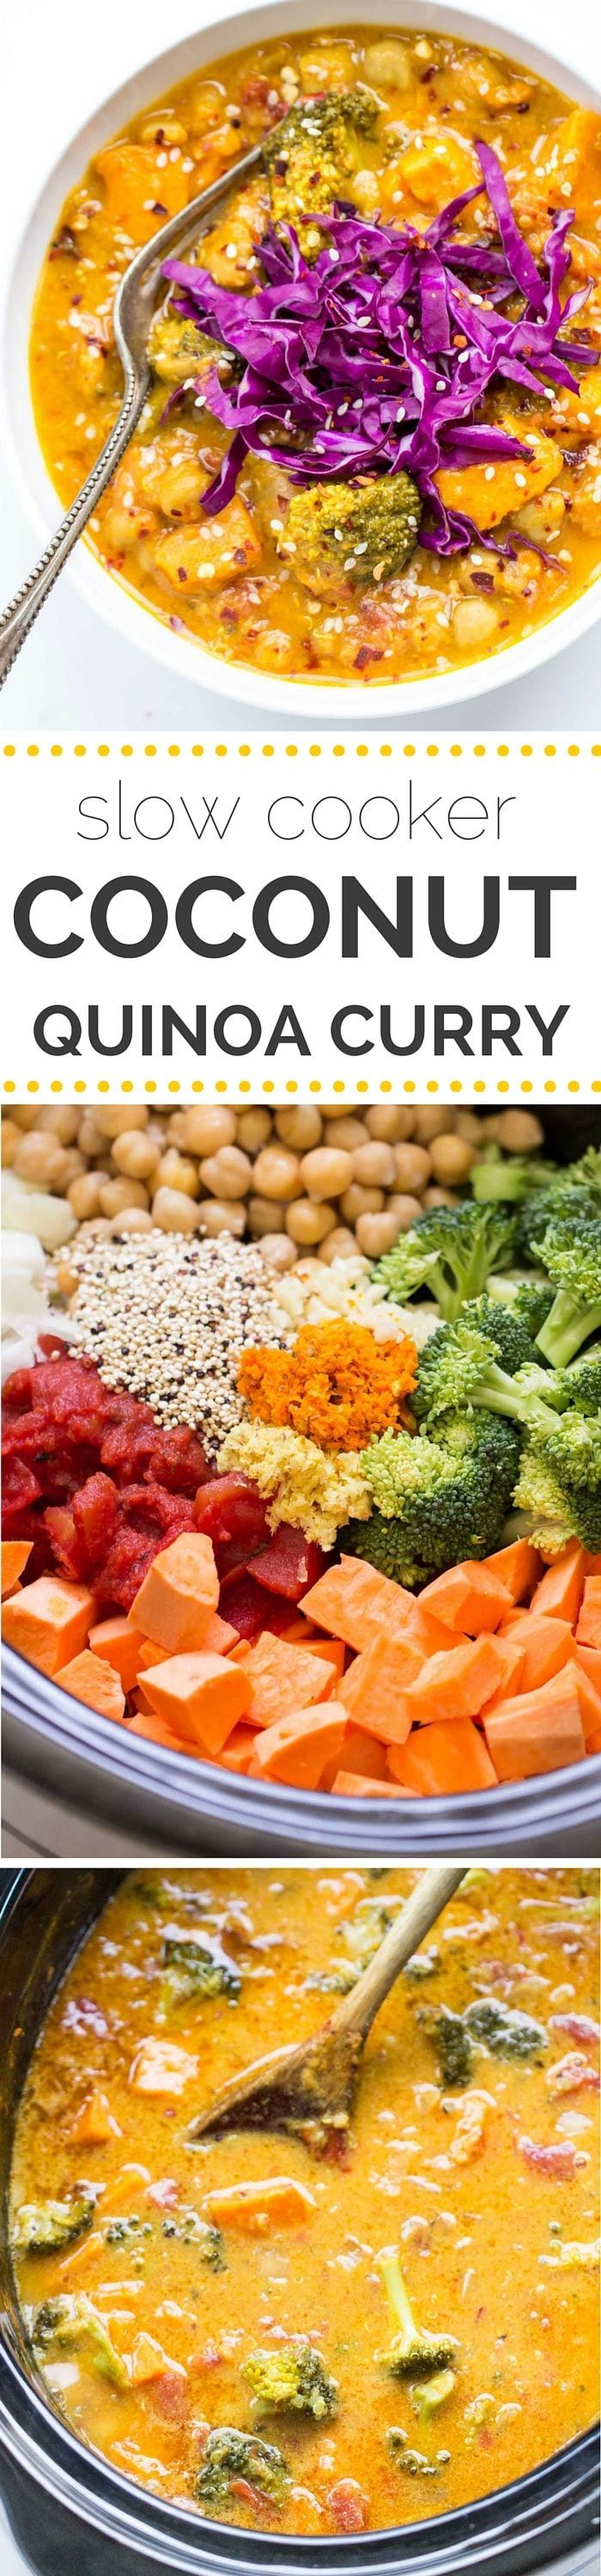 COCONUT QUINOA CURRY — made in the slow cooker with only a few simple ingredients. Only fresh, wholes